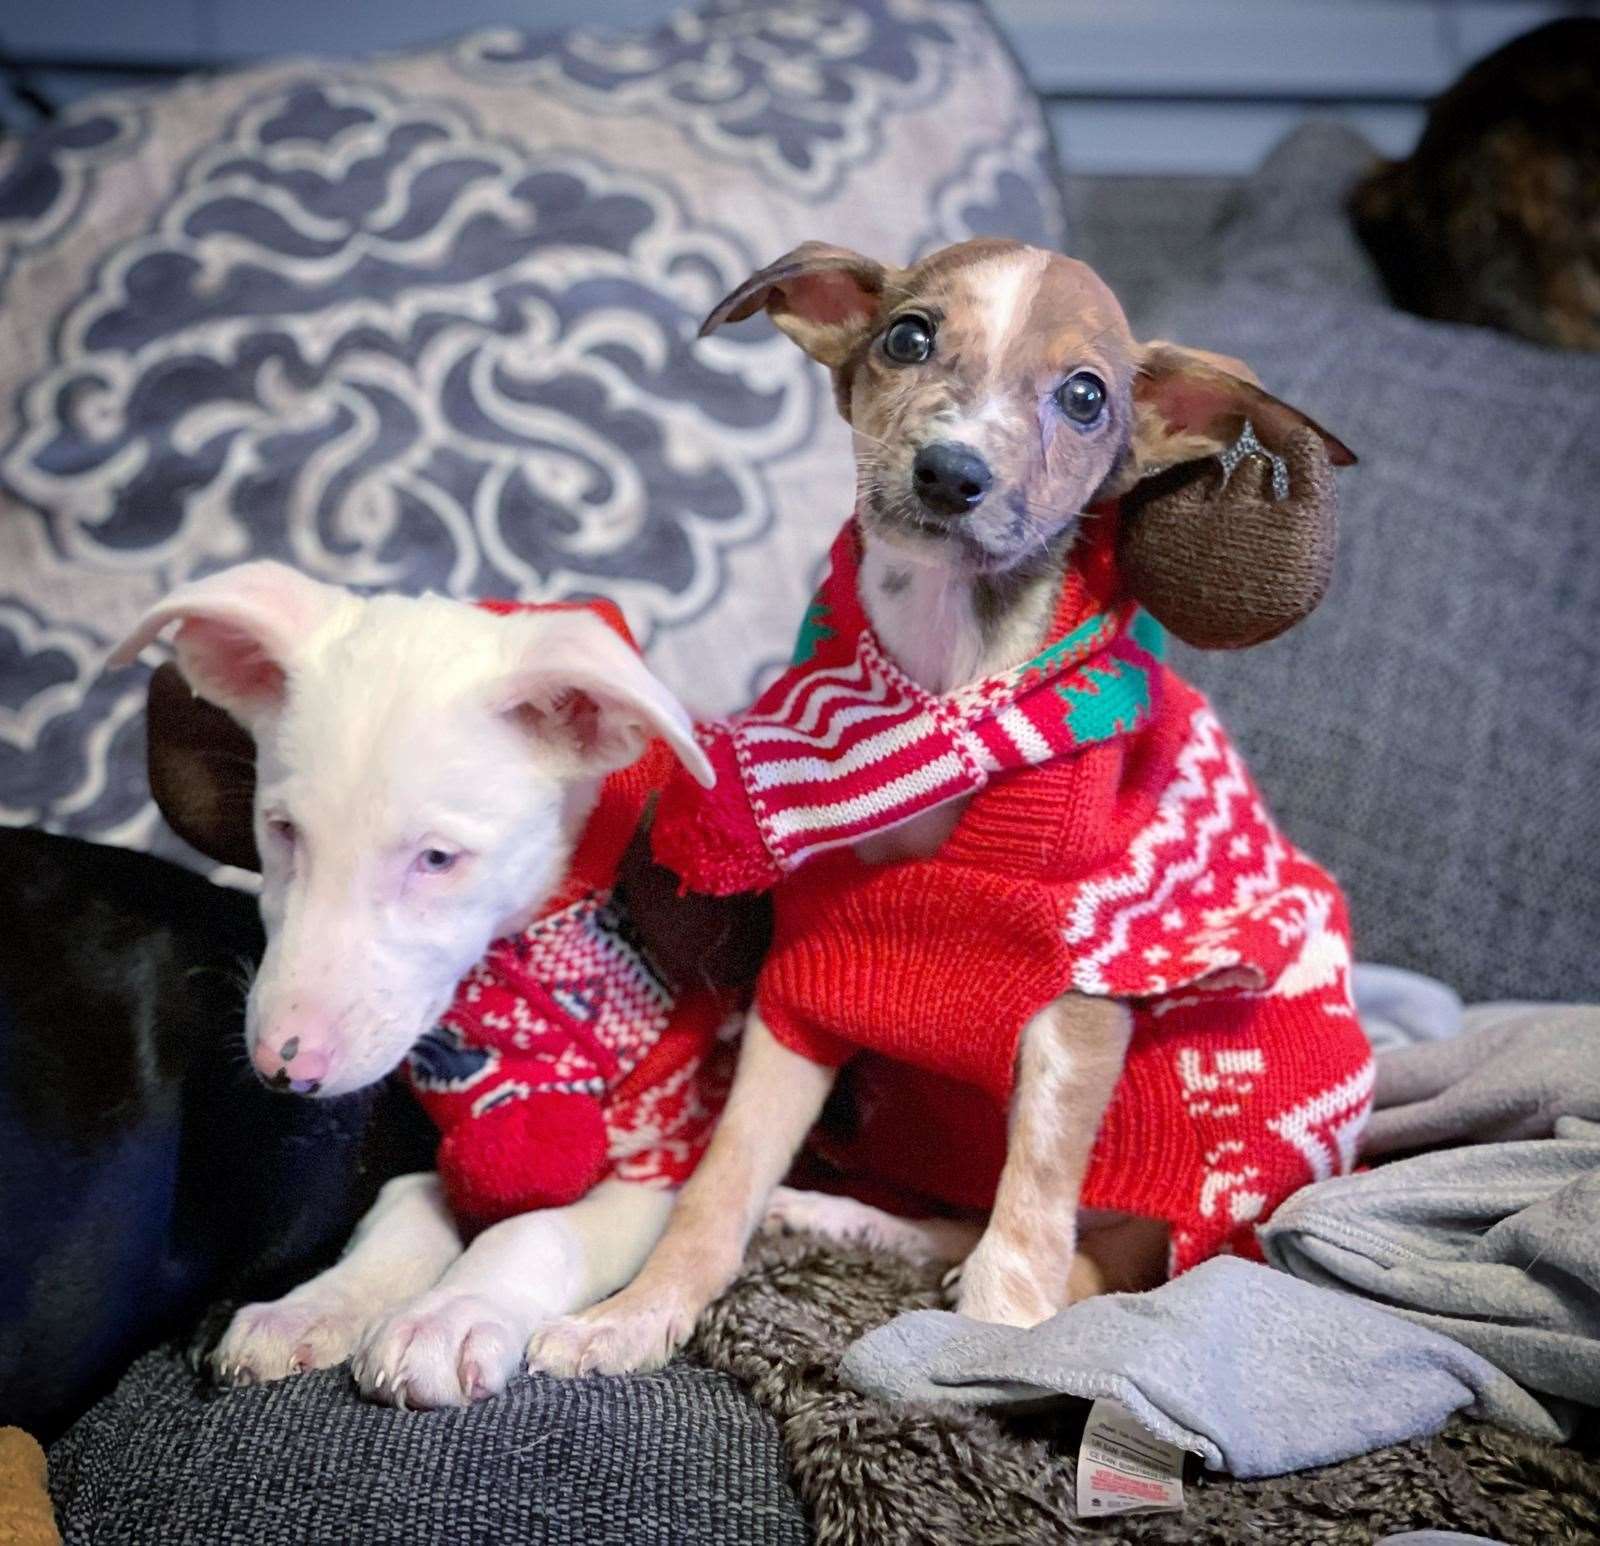 Cute: These two lurcher pups were found abandoned in a cardboard box outside Happy Pants Ranch animal sanctuary in Sittingbourne just before Christmas. Picture: Amey James/HappyPants